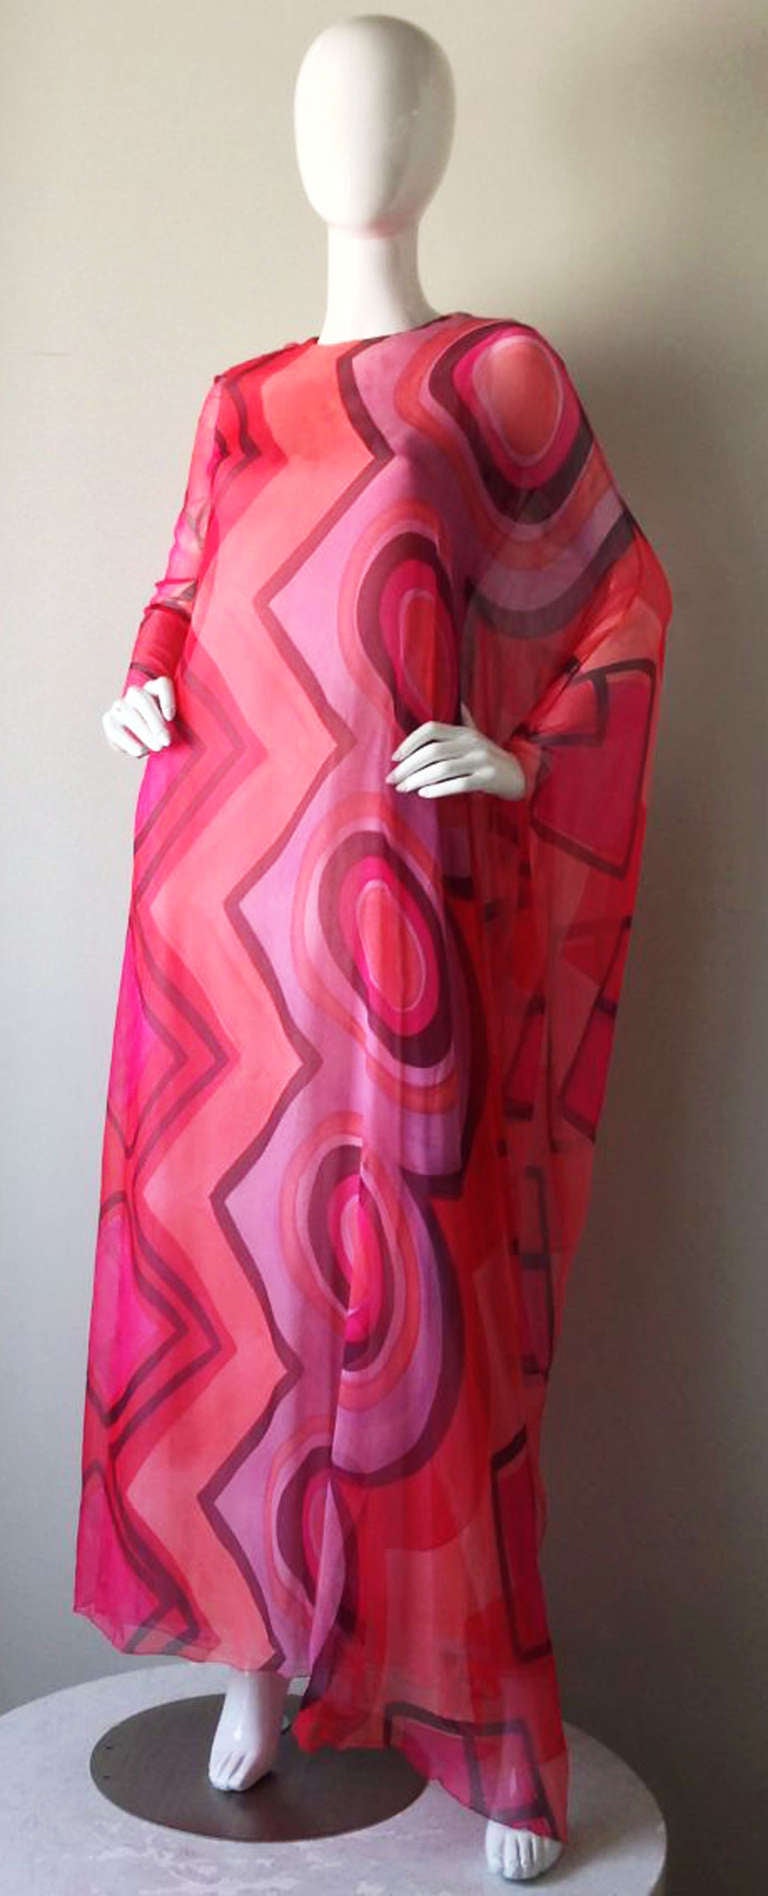 A stunning Gagliano chiffon gown. Contrasting pinks graphic print chiffon item fully silk lined and zips up back. Gown features attached flowing caped single sleeve and opposite full sleeve. Pristine, appears unworn.